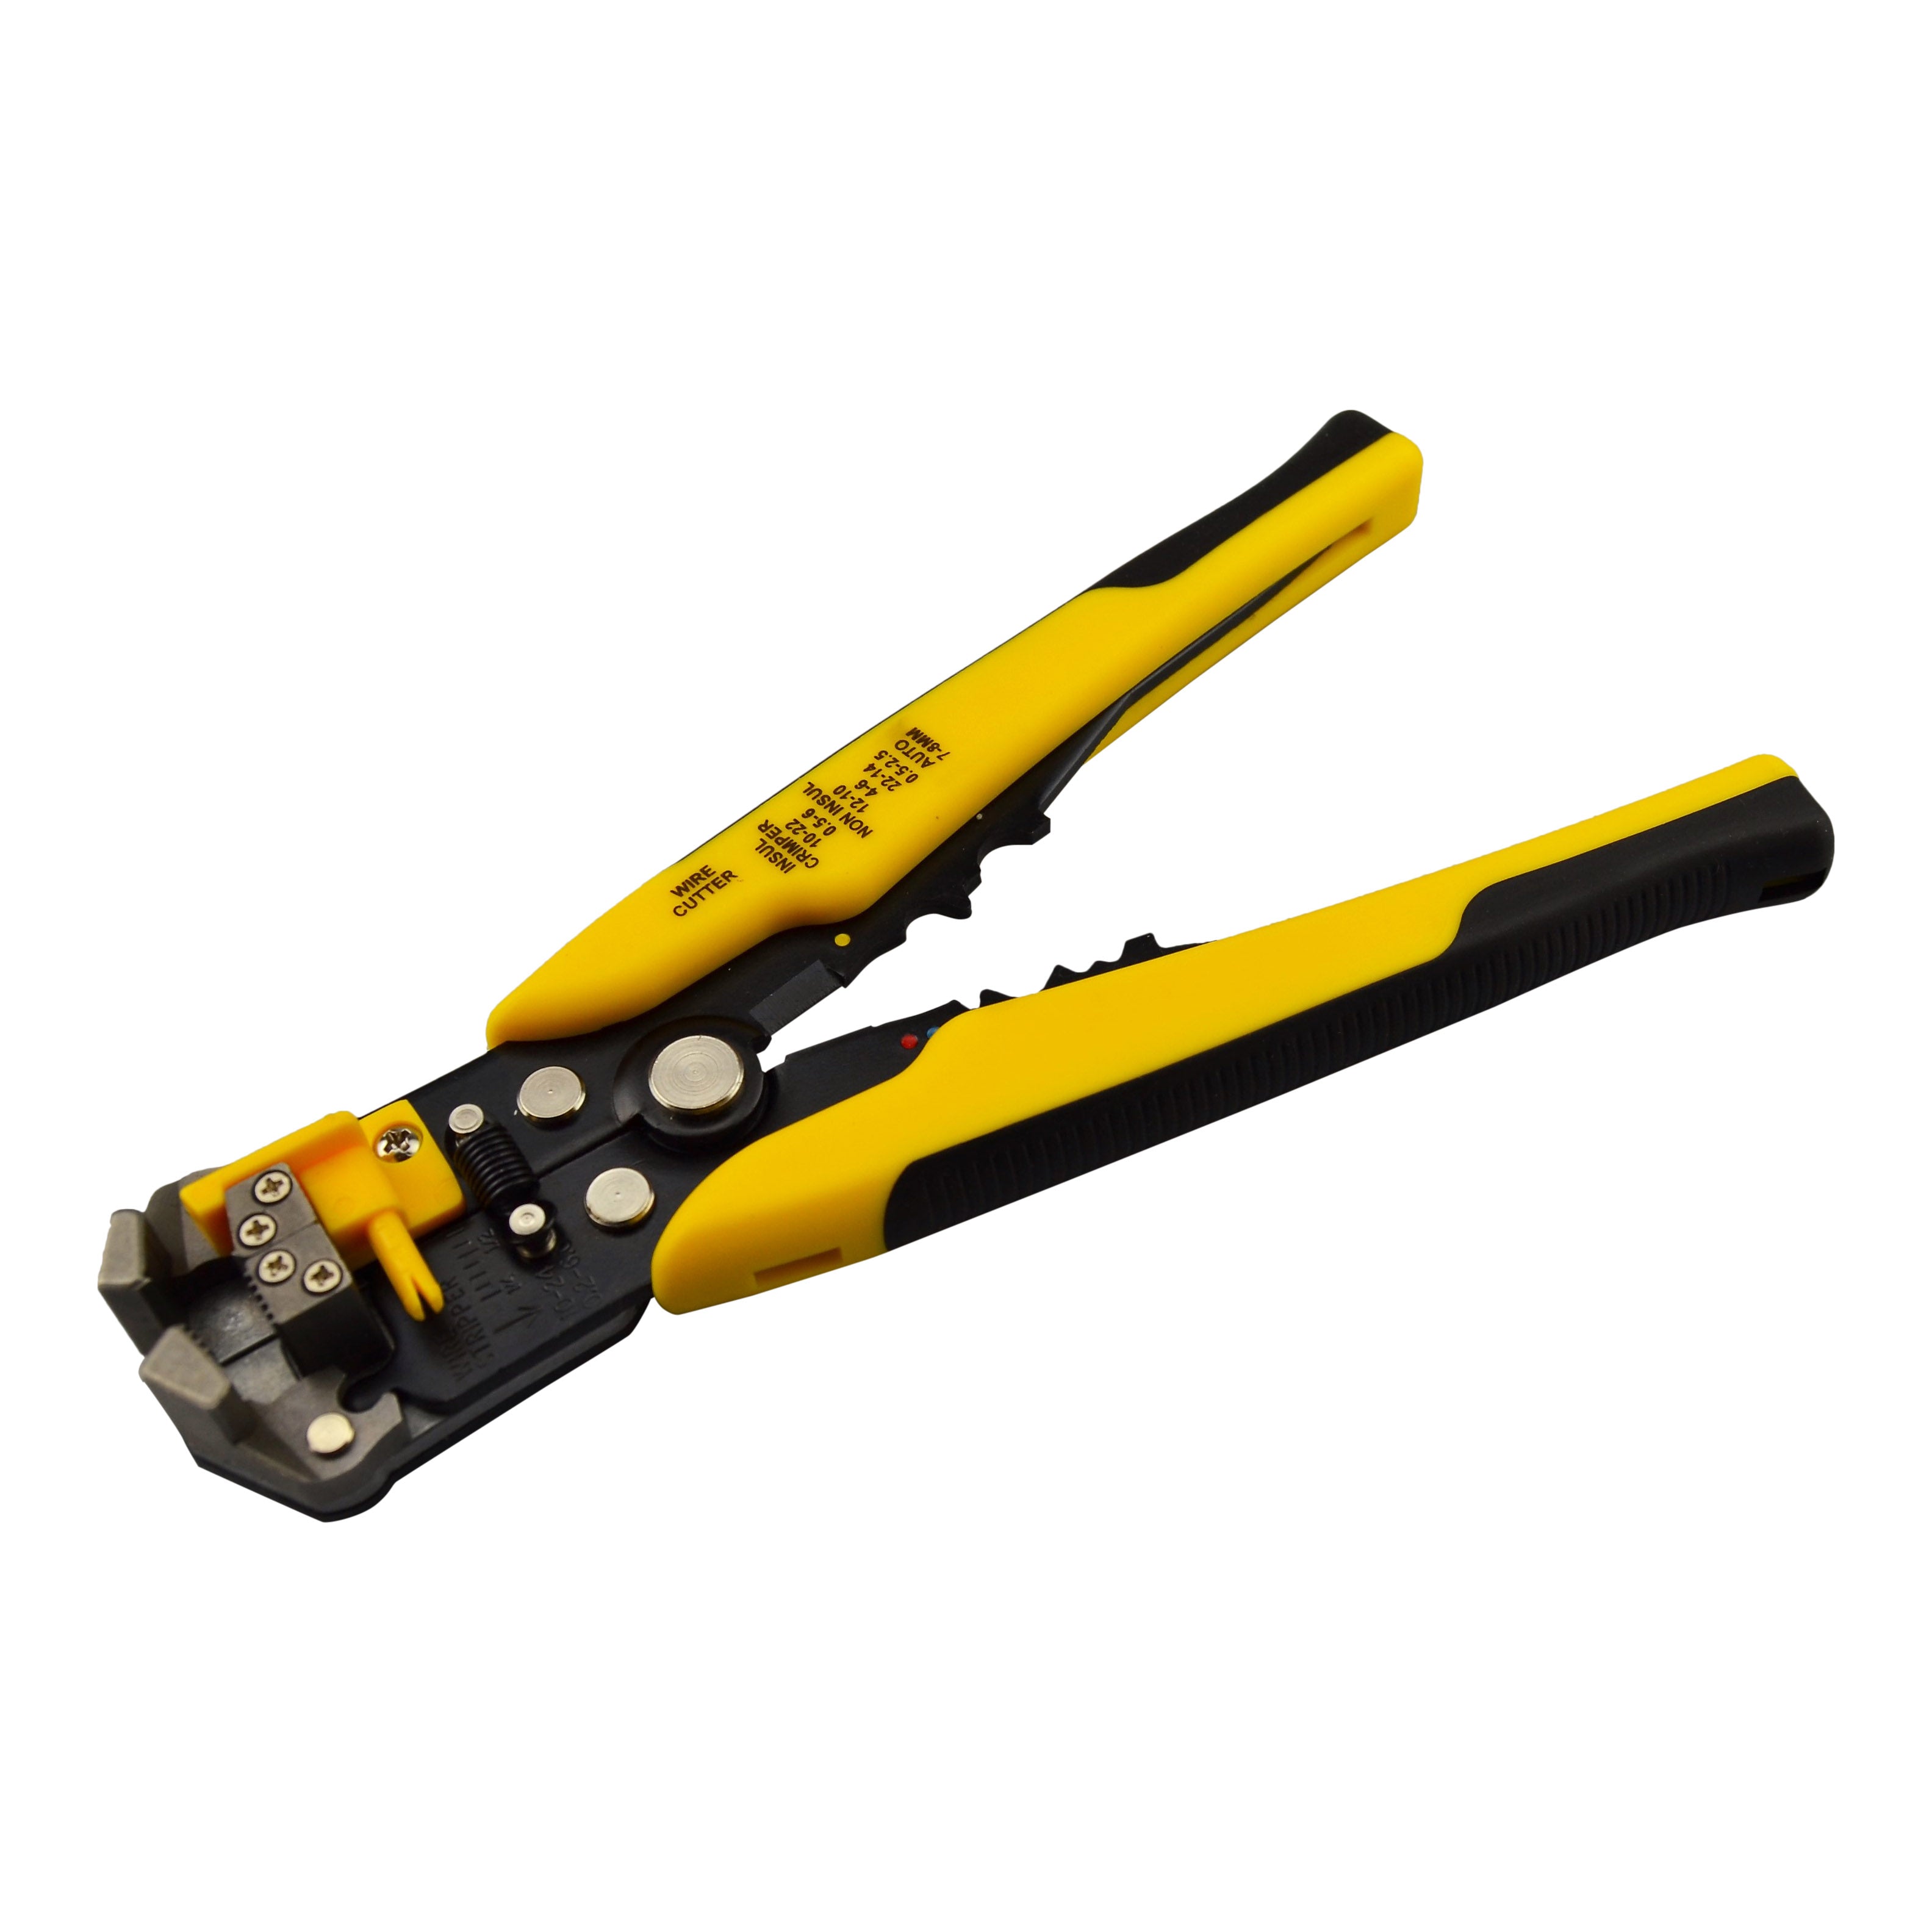 Automatic Wire Stripper, Cutter & Crimper to suit 0.2-6mm² Wire.